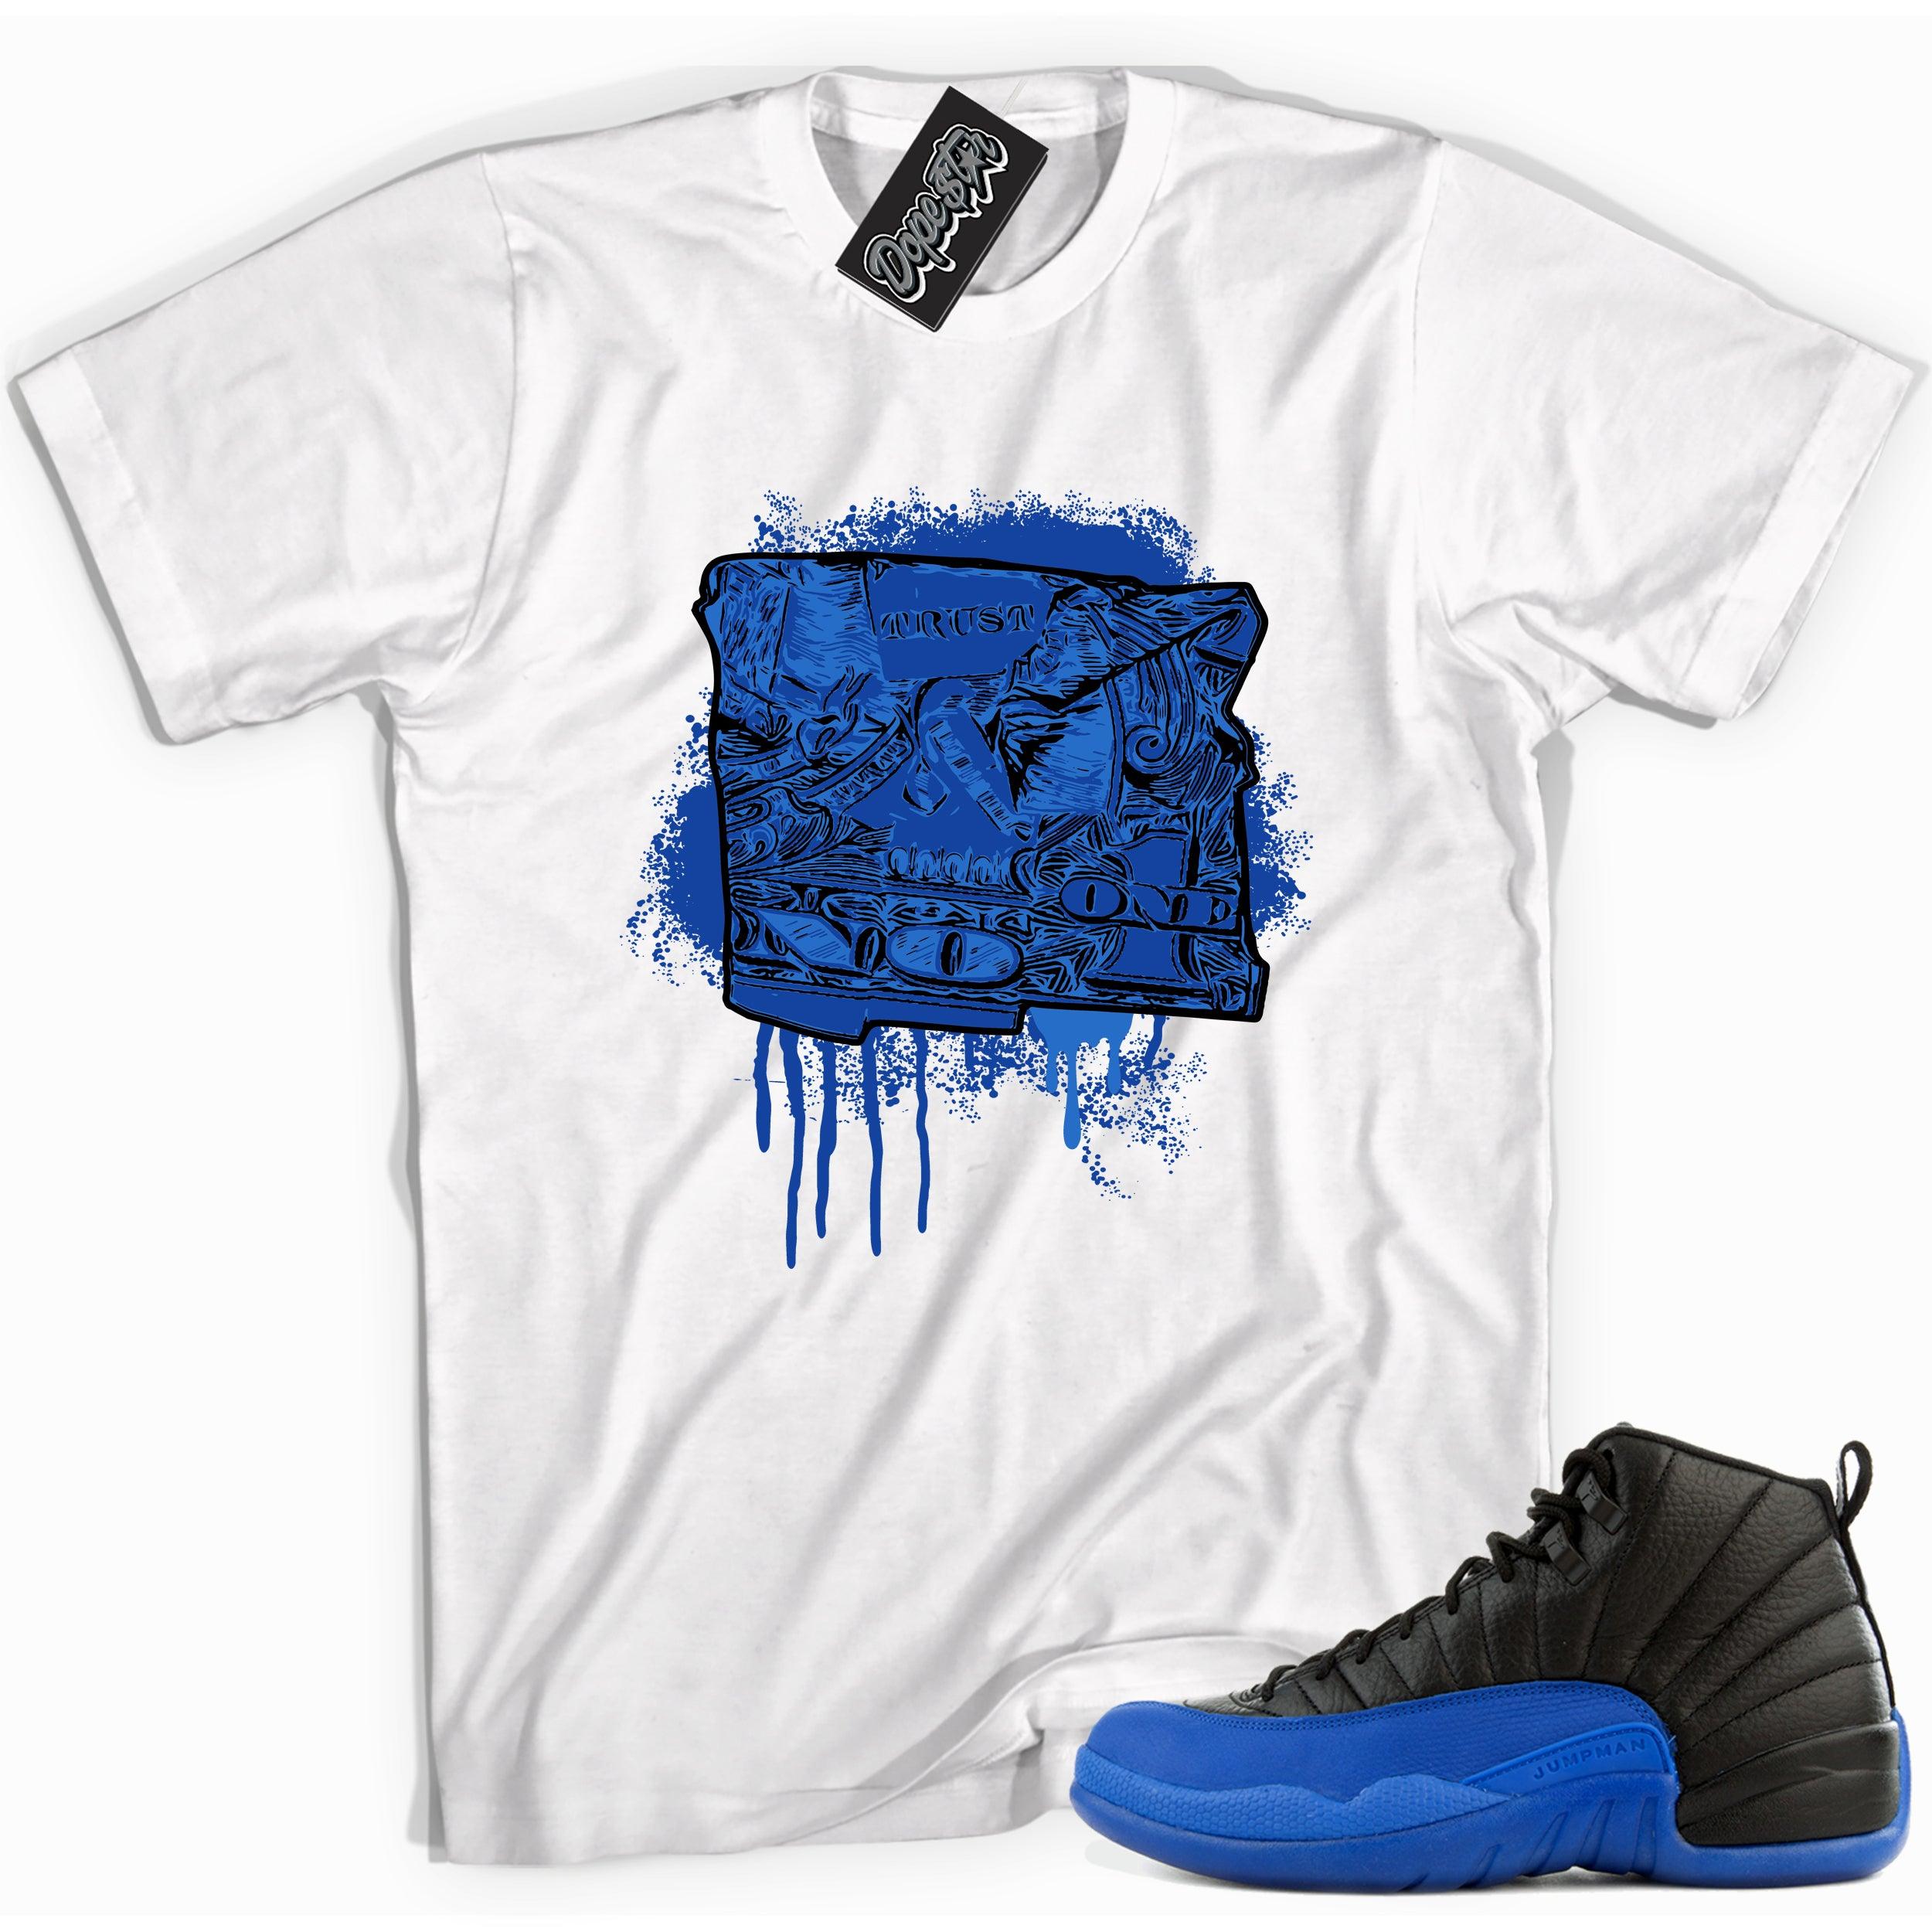 Cool white graphic tee with 'trust no one' print, that perfectly matches Air Jordan 12 Retro Black Game Royal sneakers.